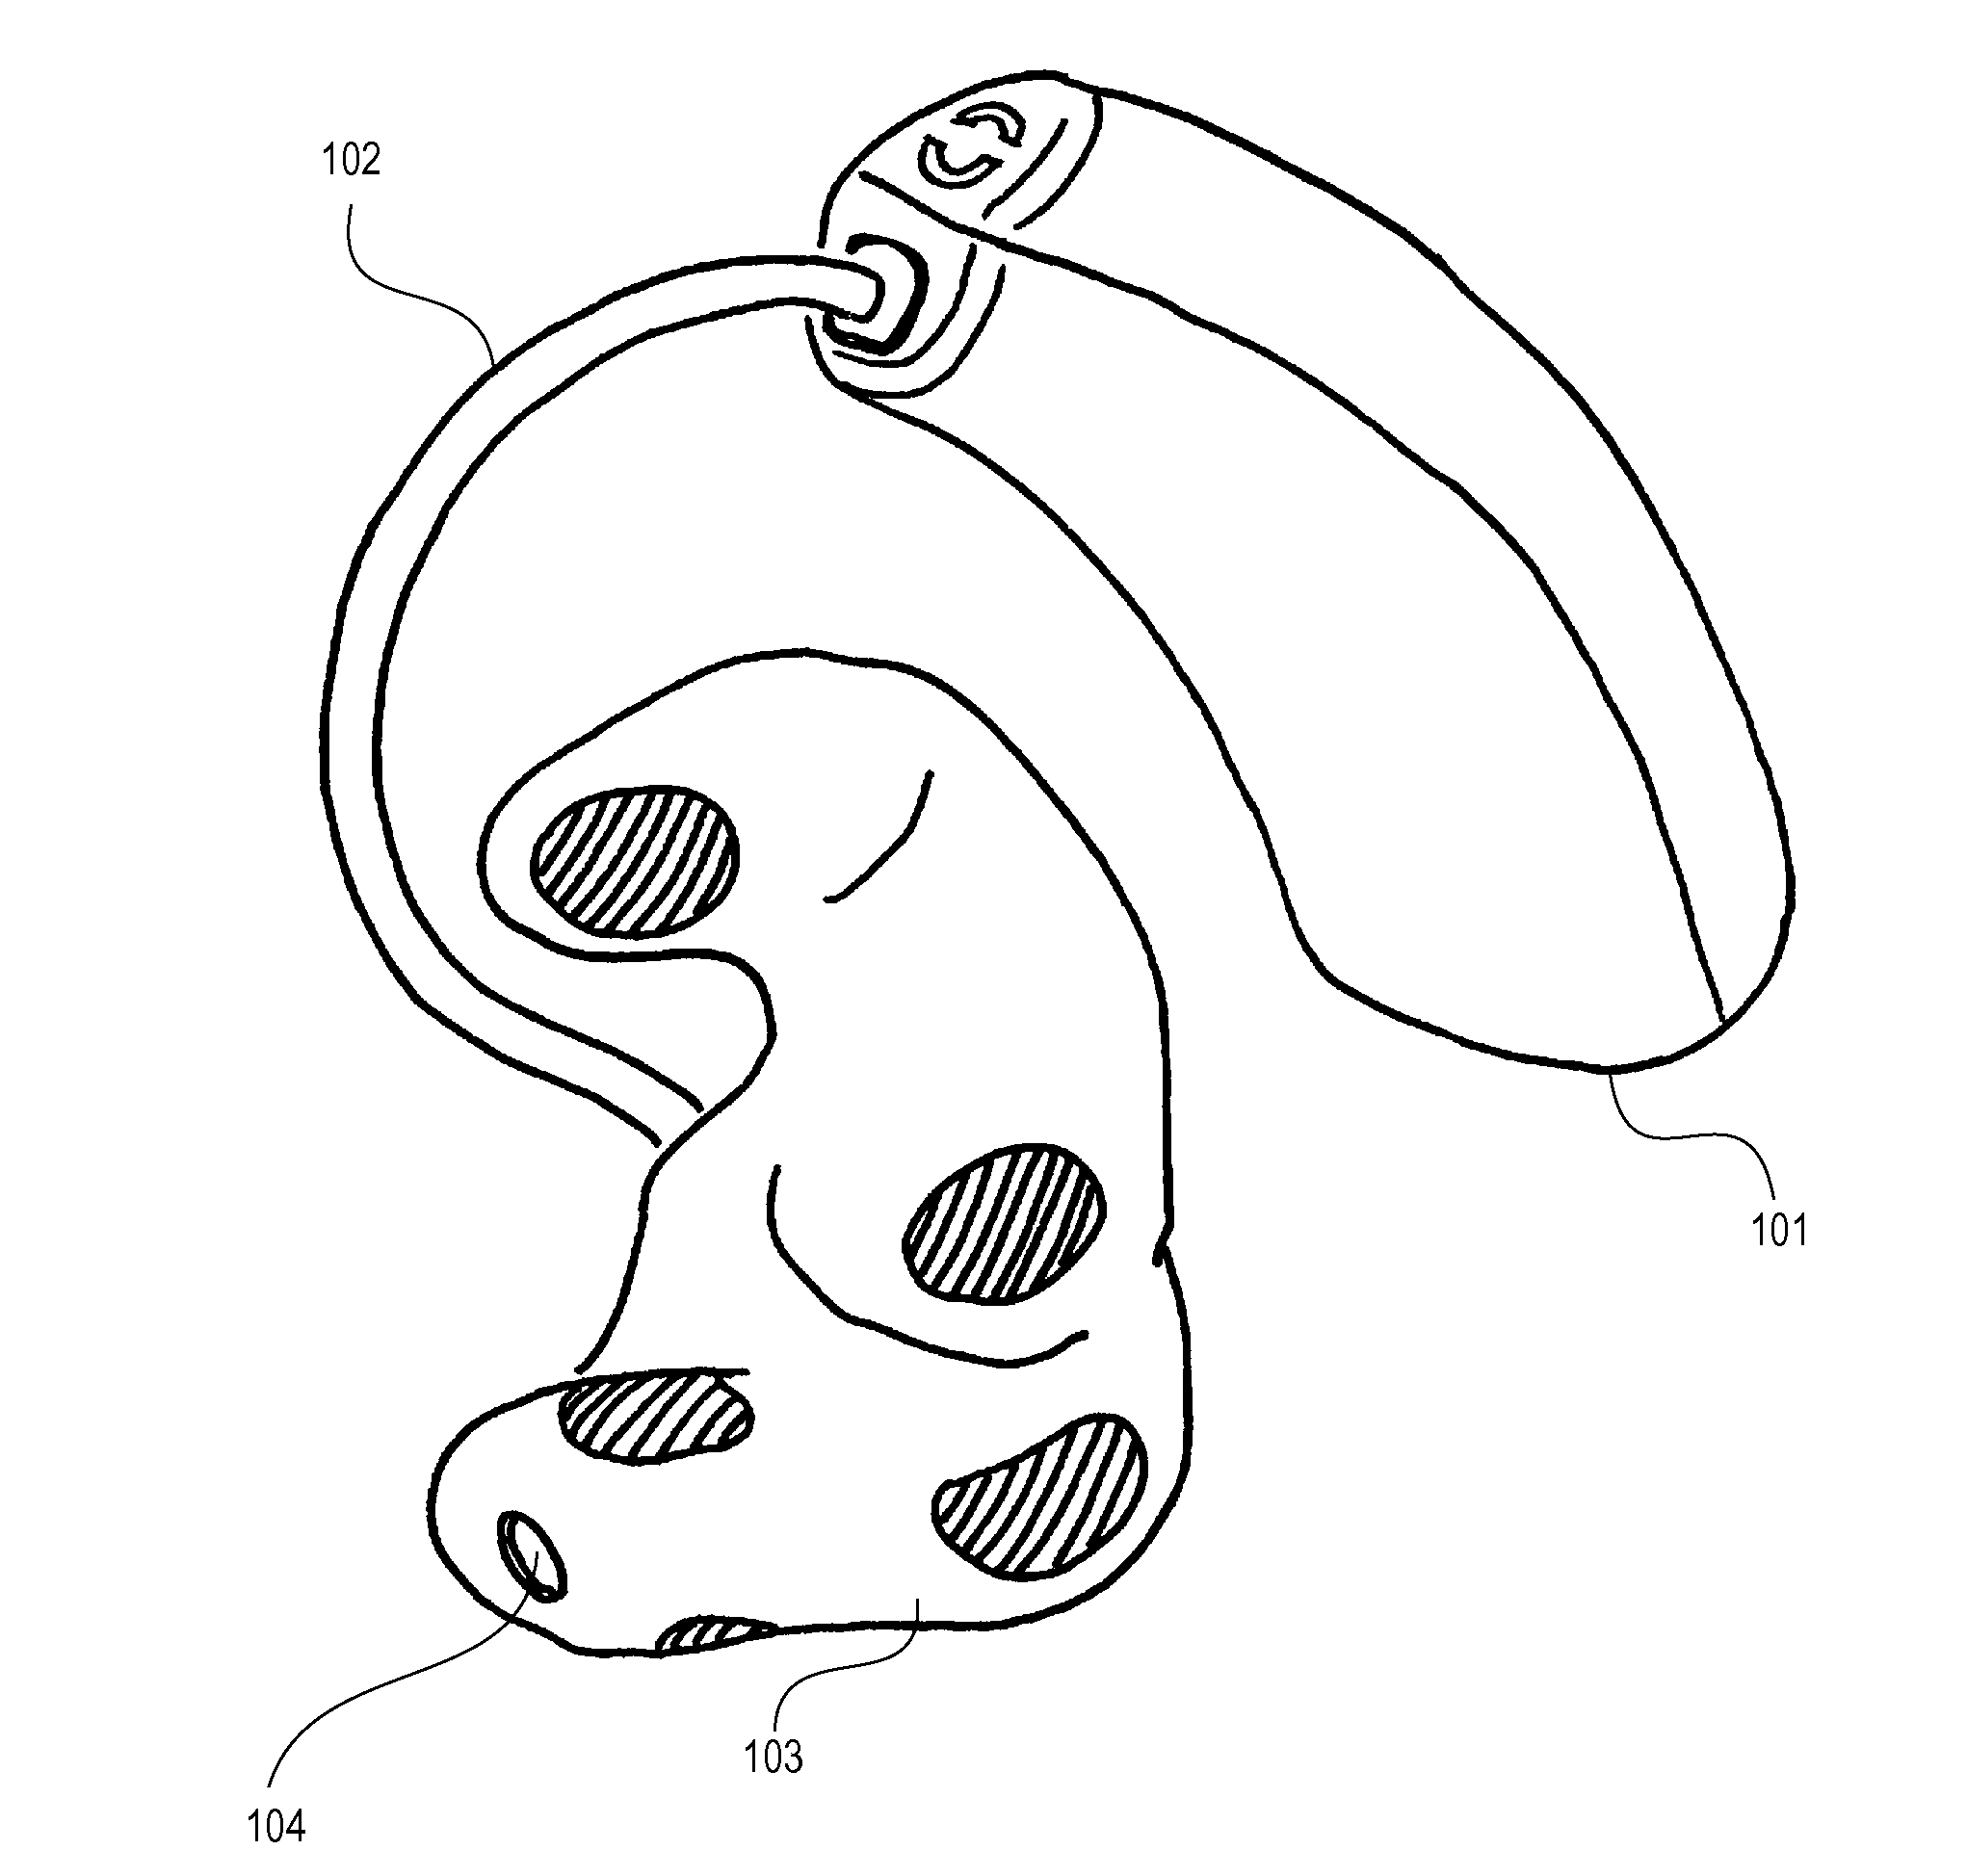 Hearing aid adapted for detecting brain waves and a method for adapting such a hearing aid